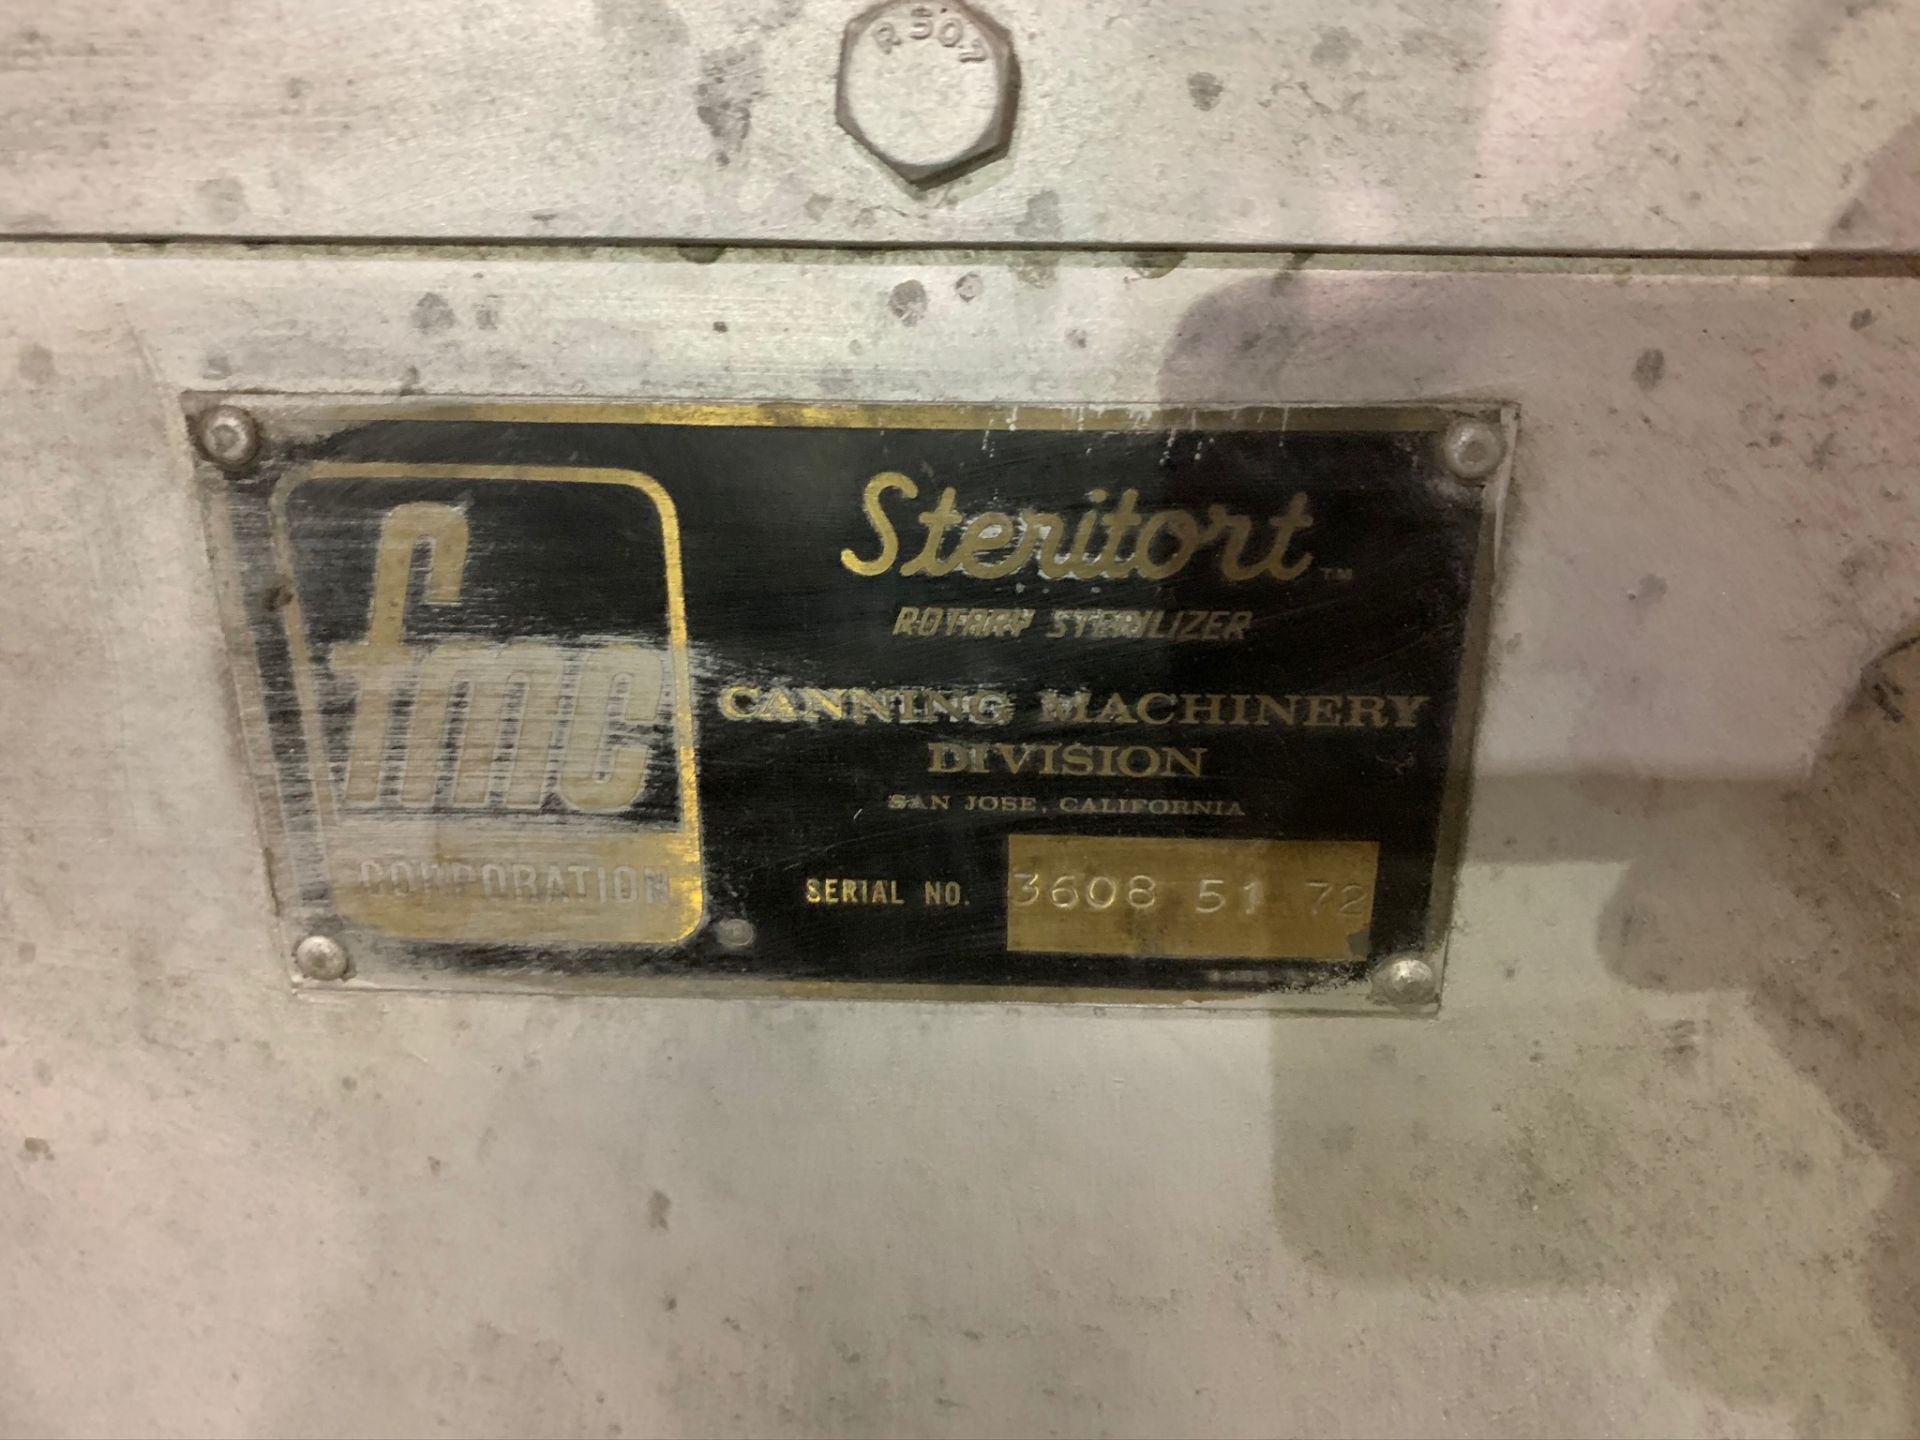 FMC Steritort Rotary Sterlizer Lab Size Retort Unit S/N 36085172 (Rigging Fee - $300) - Image 3 of 5